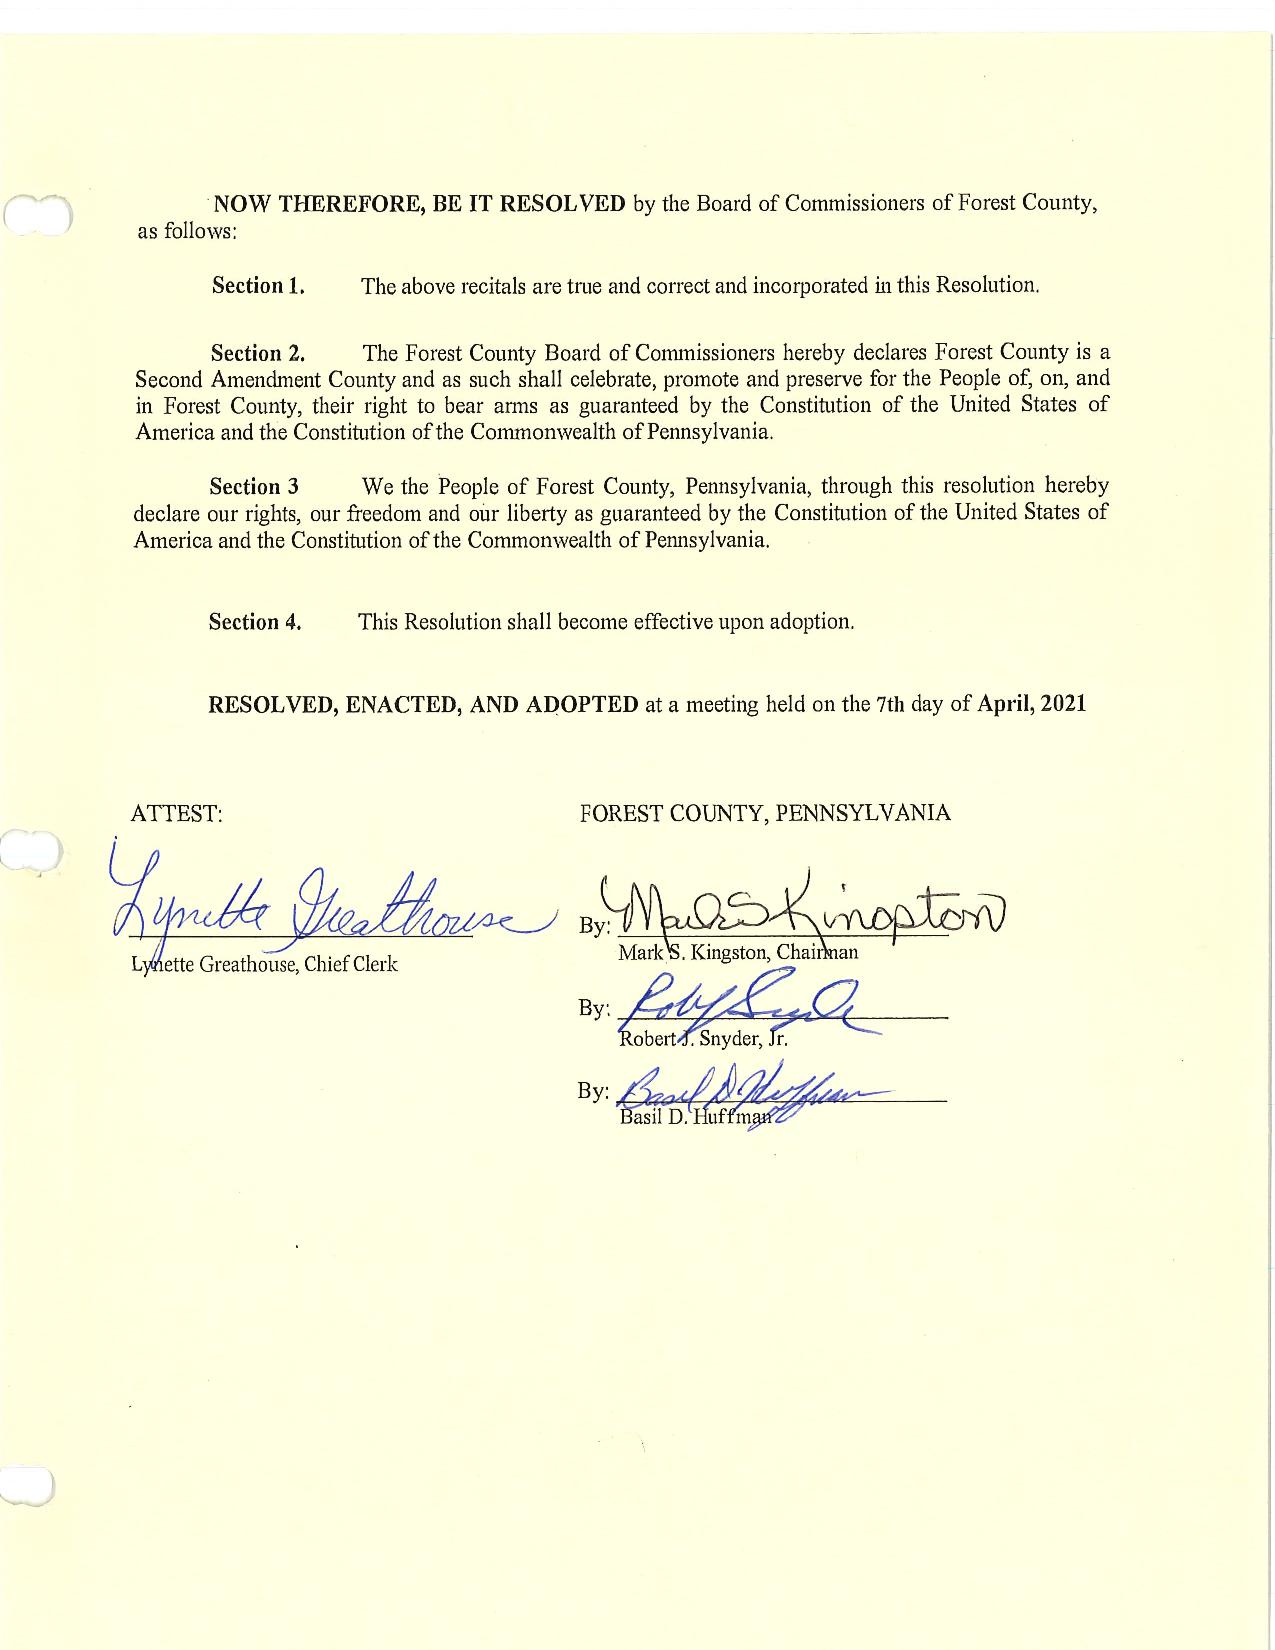 Forest County Pennsylvania Resolution Page 2